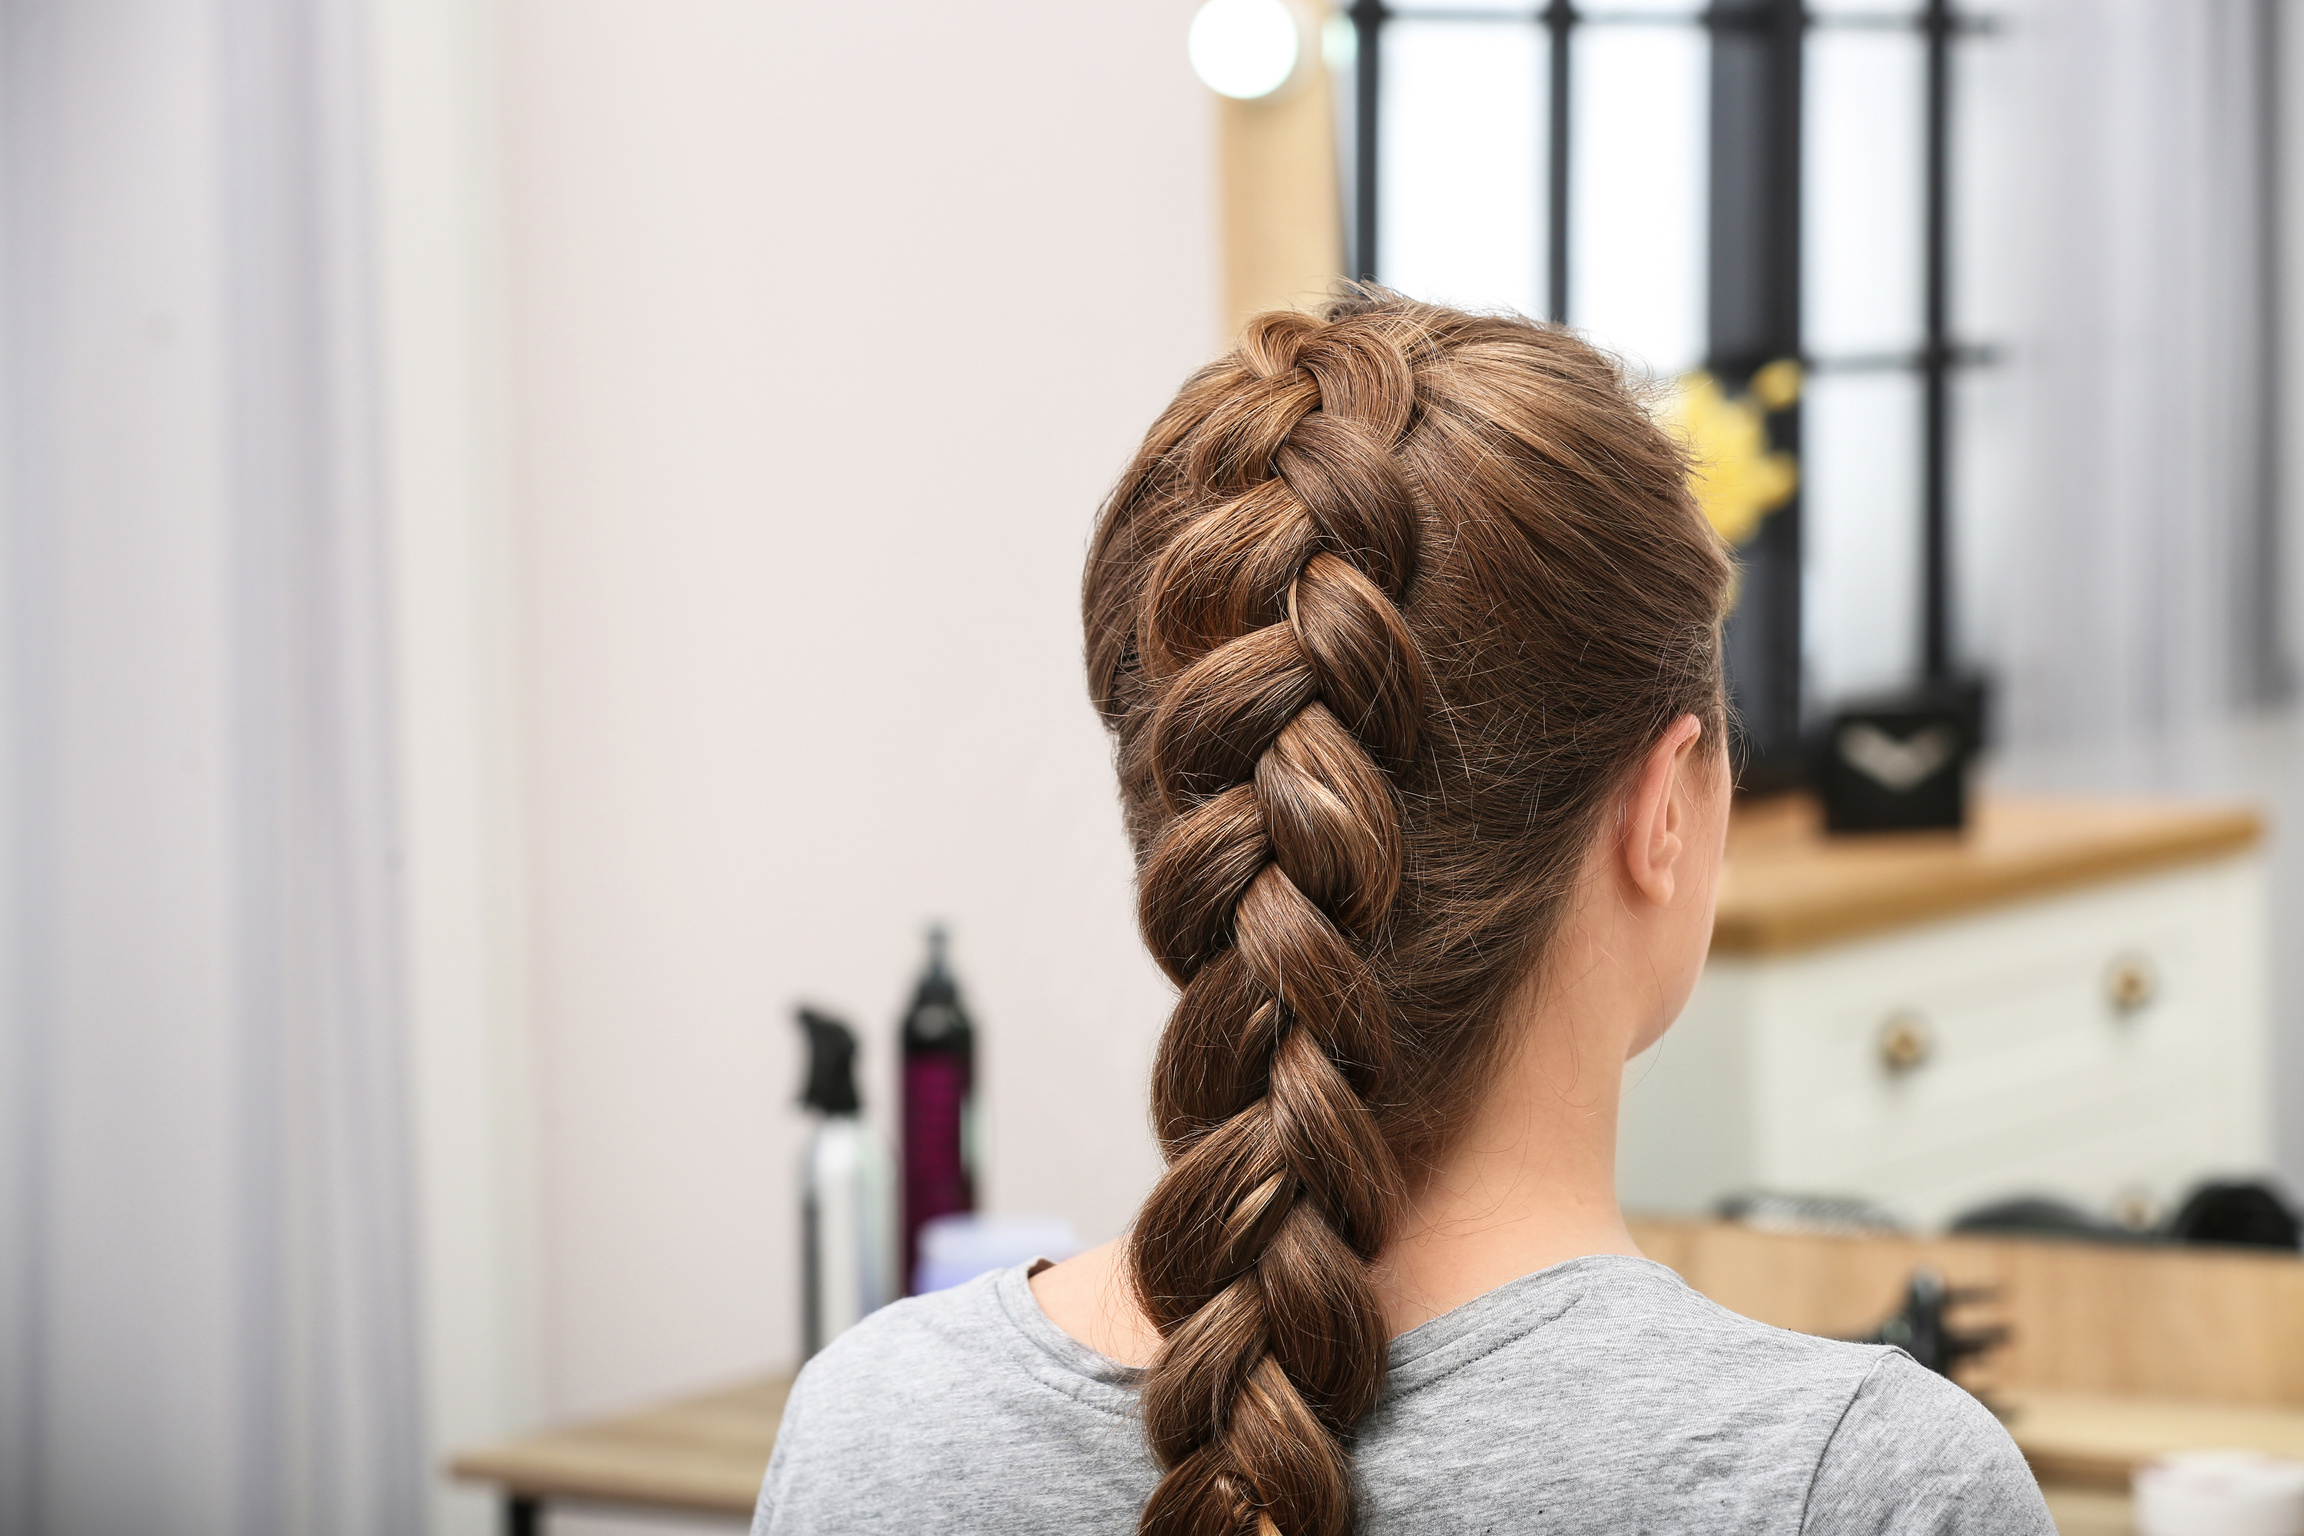 Woman with Braided Hair in Professional Salon